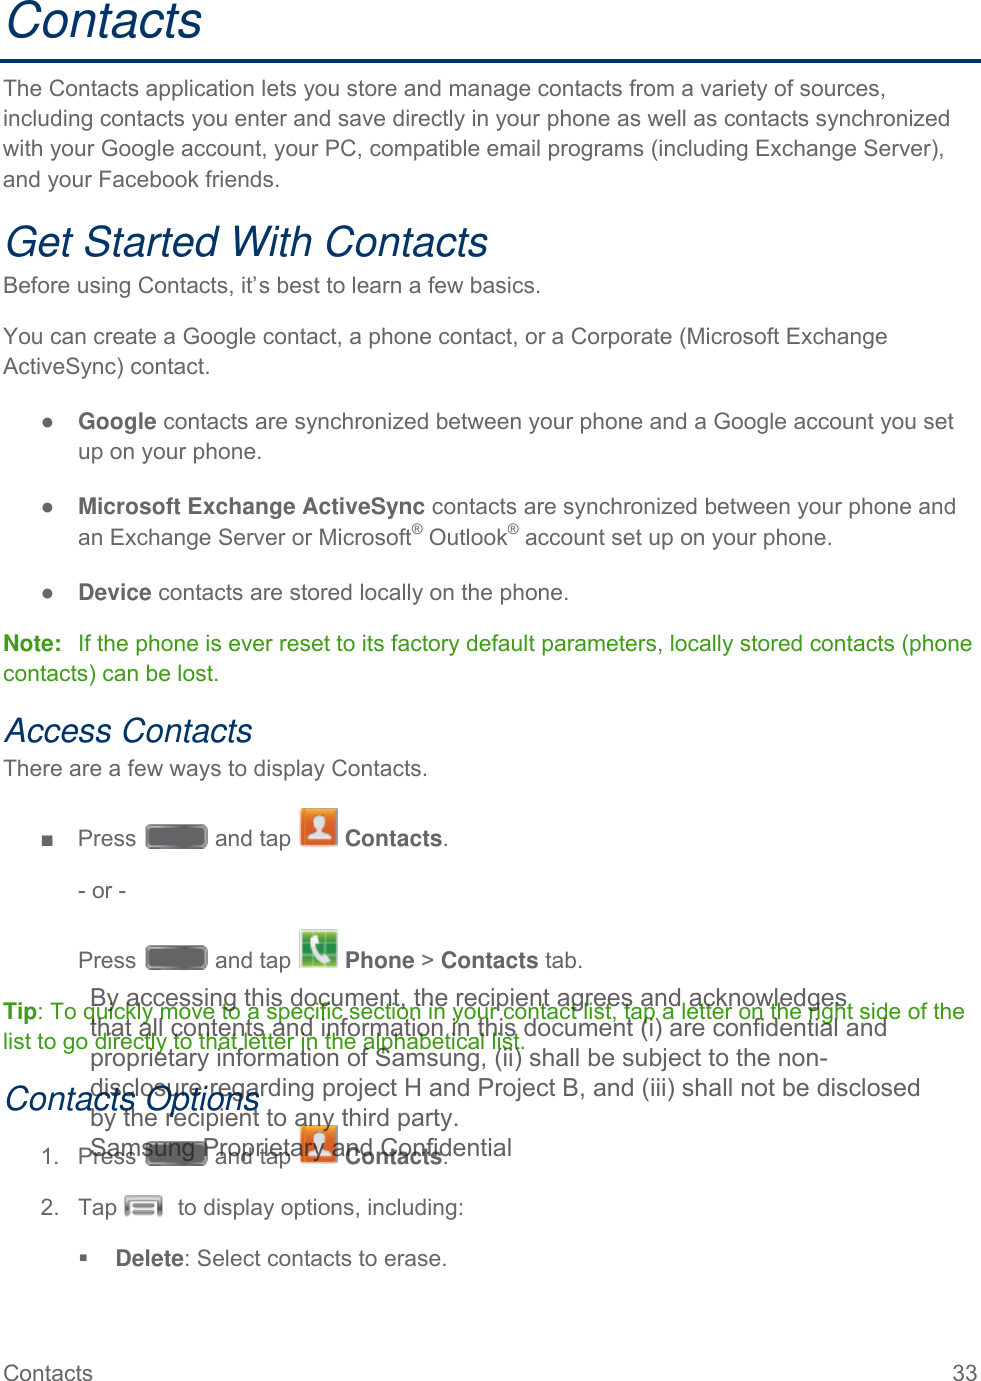  Contacts 33   Contacts The Contacts application lets you store and manage contacts from a variety of sources, including contacts you enter and save directly in your phone as well as contacts synchronized with your Google account, your PC, compatible email programs (including Exchange Server), and your Facebook friends. Get Started With Contacts Before using Contacts, it’s best to learn a few basics. You can create a Google contact, a phone contact, or a Corporate (Microsoft Exchange ActiveSync) contact. ● Google contacts are synchronized between your phone and a Google account you set up on your phone. ● Microsoft Exchange ActiveSync contacts are synchronized between your phone and  an Exchange Server or Microsoft® Outlook® account set up on your phone. ● Device contacts are stored locally on the phone. Note:   If the phone is ever reset to its factory default parameters, locally stored contacts (phone contacts) can be lost. Access Contacts There are a few ways to display Contacts. ■  Press   and tap   Contacts. - or - Press   and tap   Phone &gt; Contacts tab. Tip: To quickly move to a specific section in your contact list, tap a letter on the right side of the list to go directly to that letter in the alphabetical list. Contacts Options 1.  Press   and tap   Contacts. 2. Tap   to display options, including:   Delete: Select contacts to erase. By accessing this document, the recipient agrees and acknowledges that all contents and information in this document (i) are confidential and proprietary information of Samsung, (ii) shall be subject to the non- disclosure regarding project H and Project B, and (iii) shall not be disclosed by the recipient to any third party. Samsung Proprietary and Confidential 